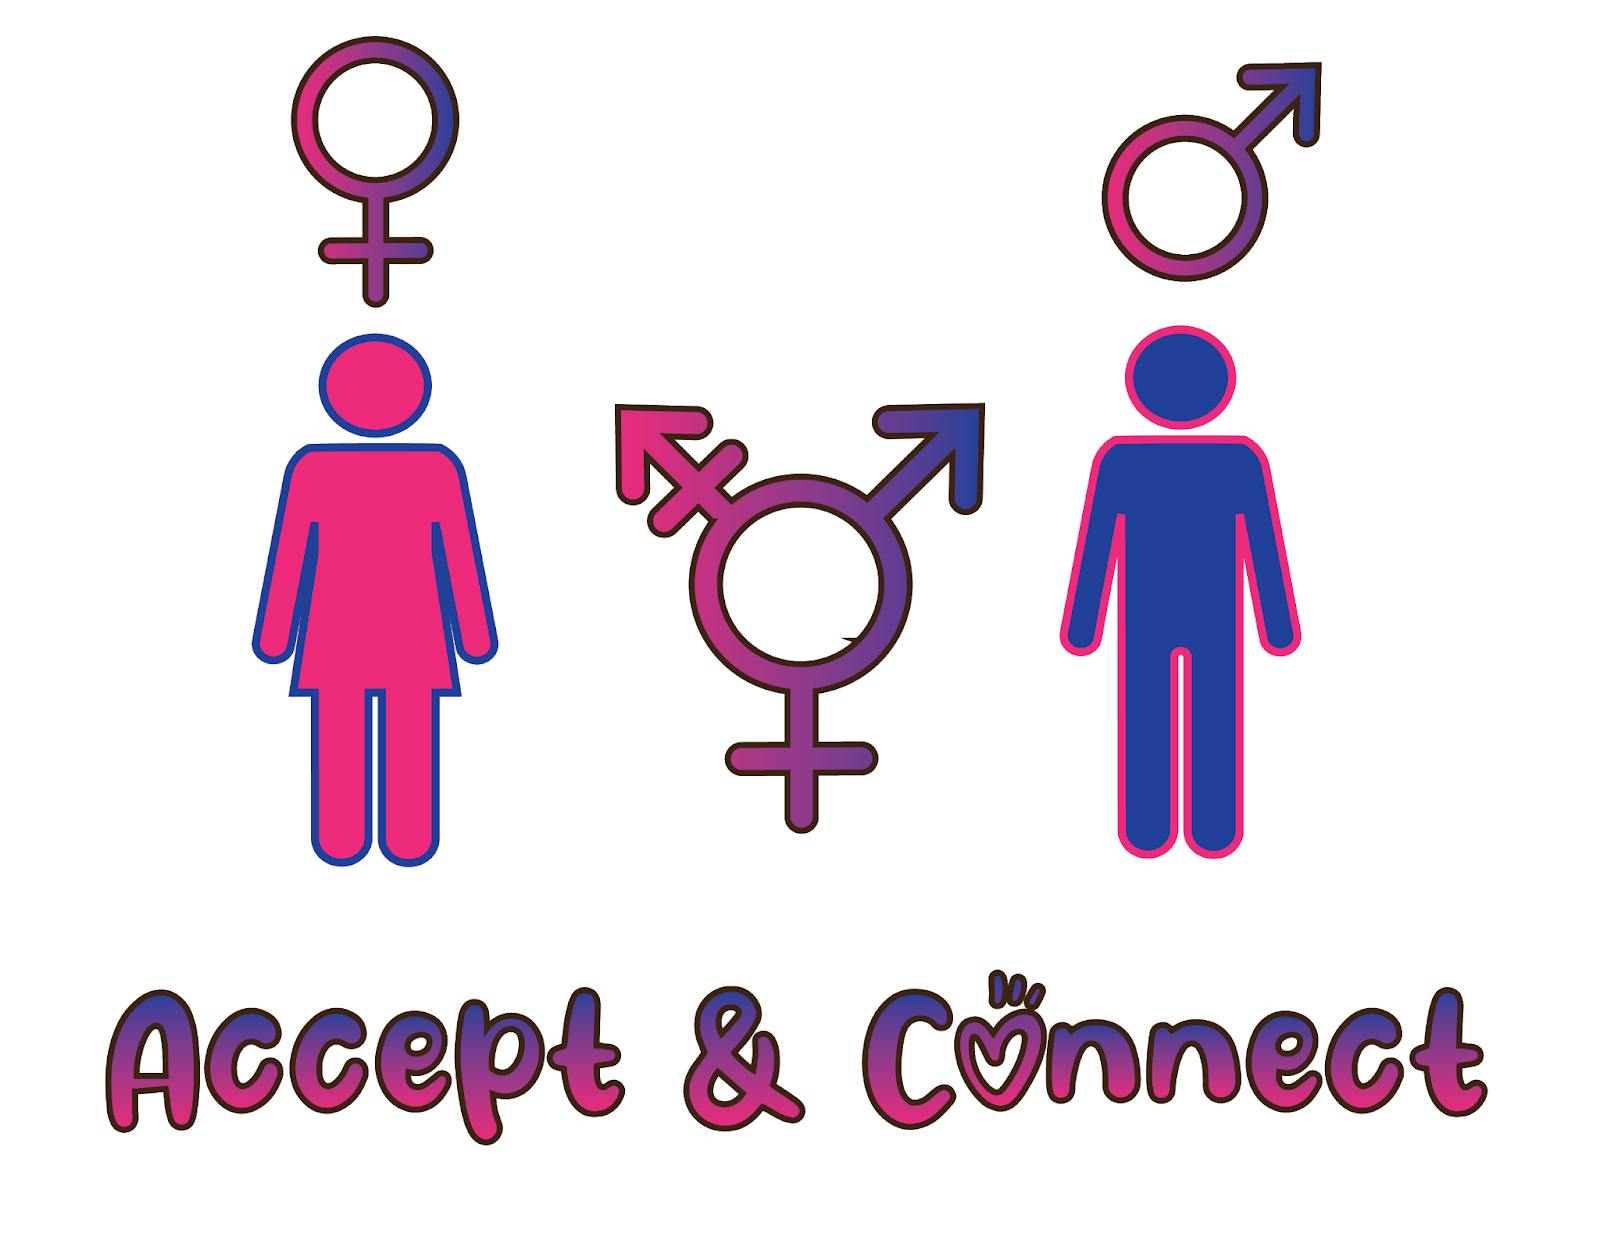 Illustration of female symbol, male symbol, and intersex symbol above the text "Accept & Connect."